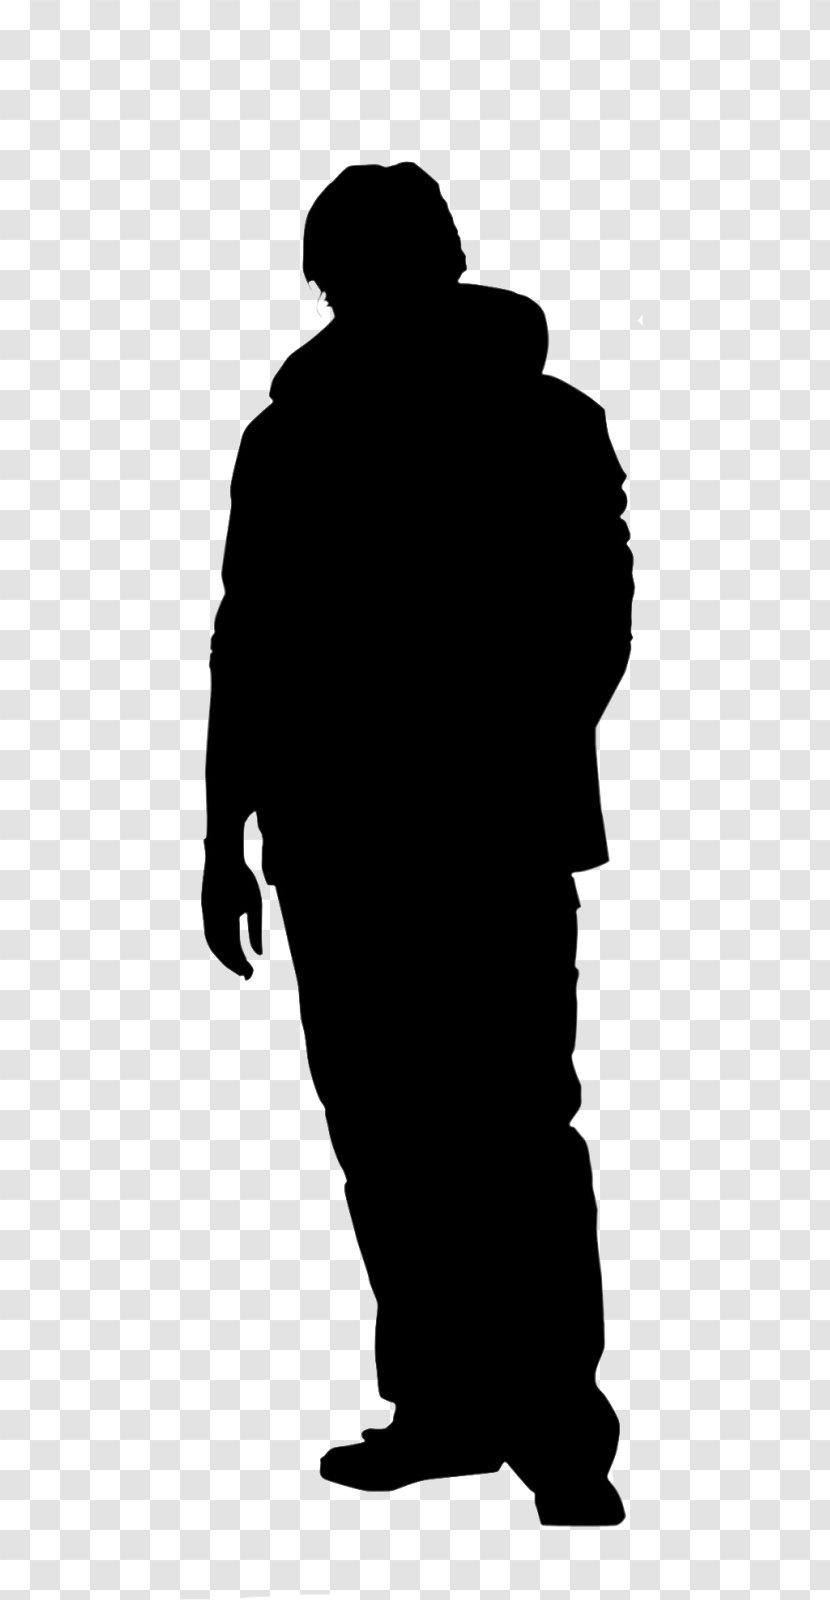 Wife Student Imam Midlife Crisis - Silhouettes Transparent PNG